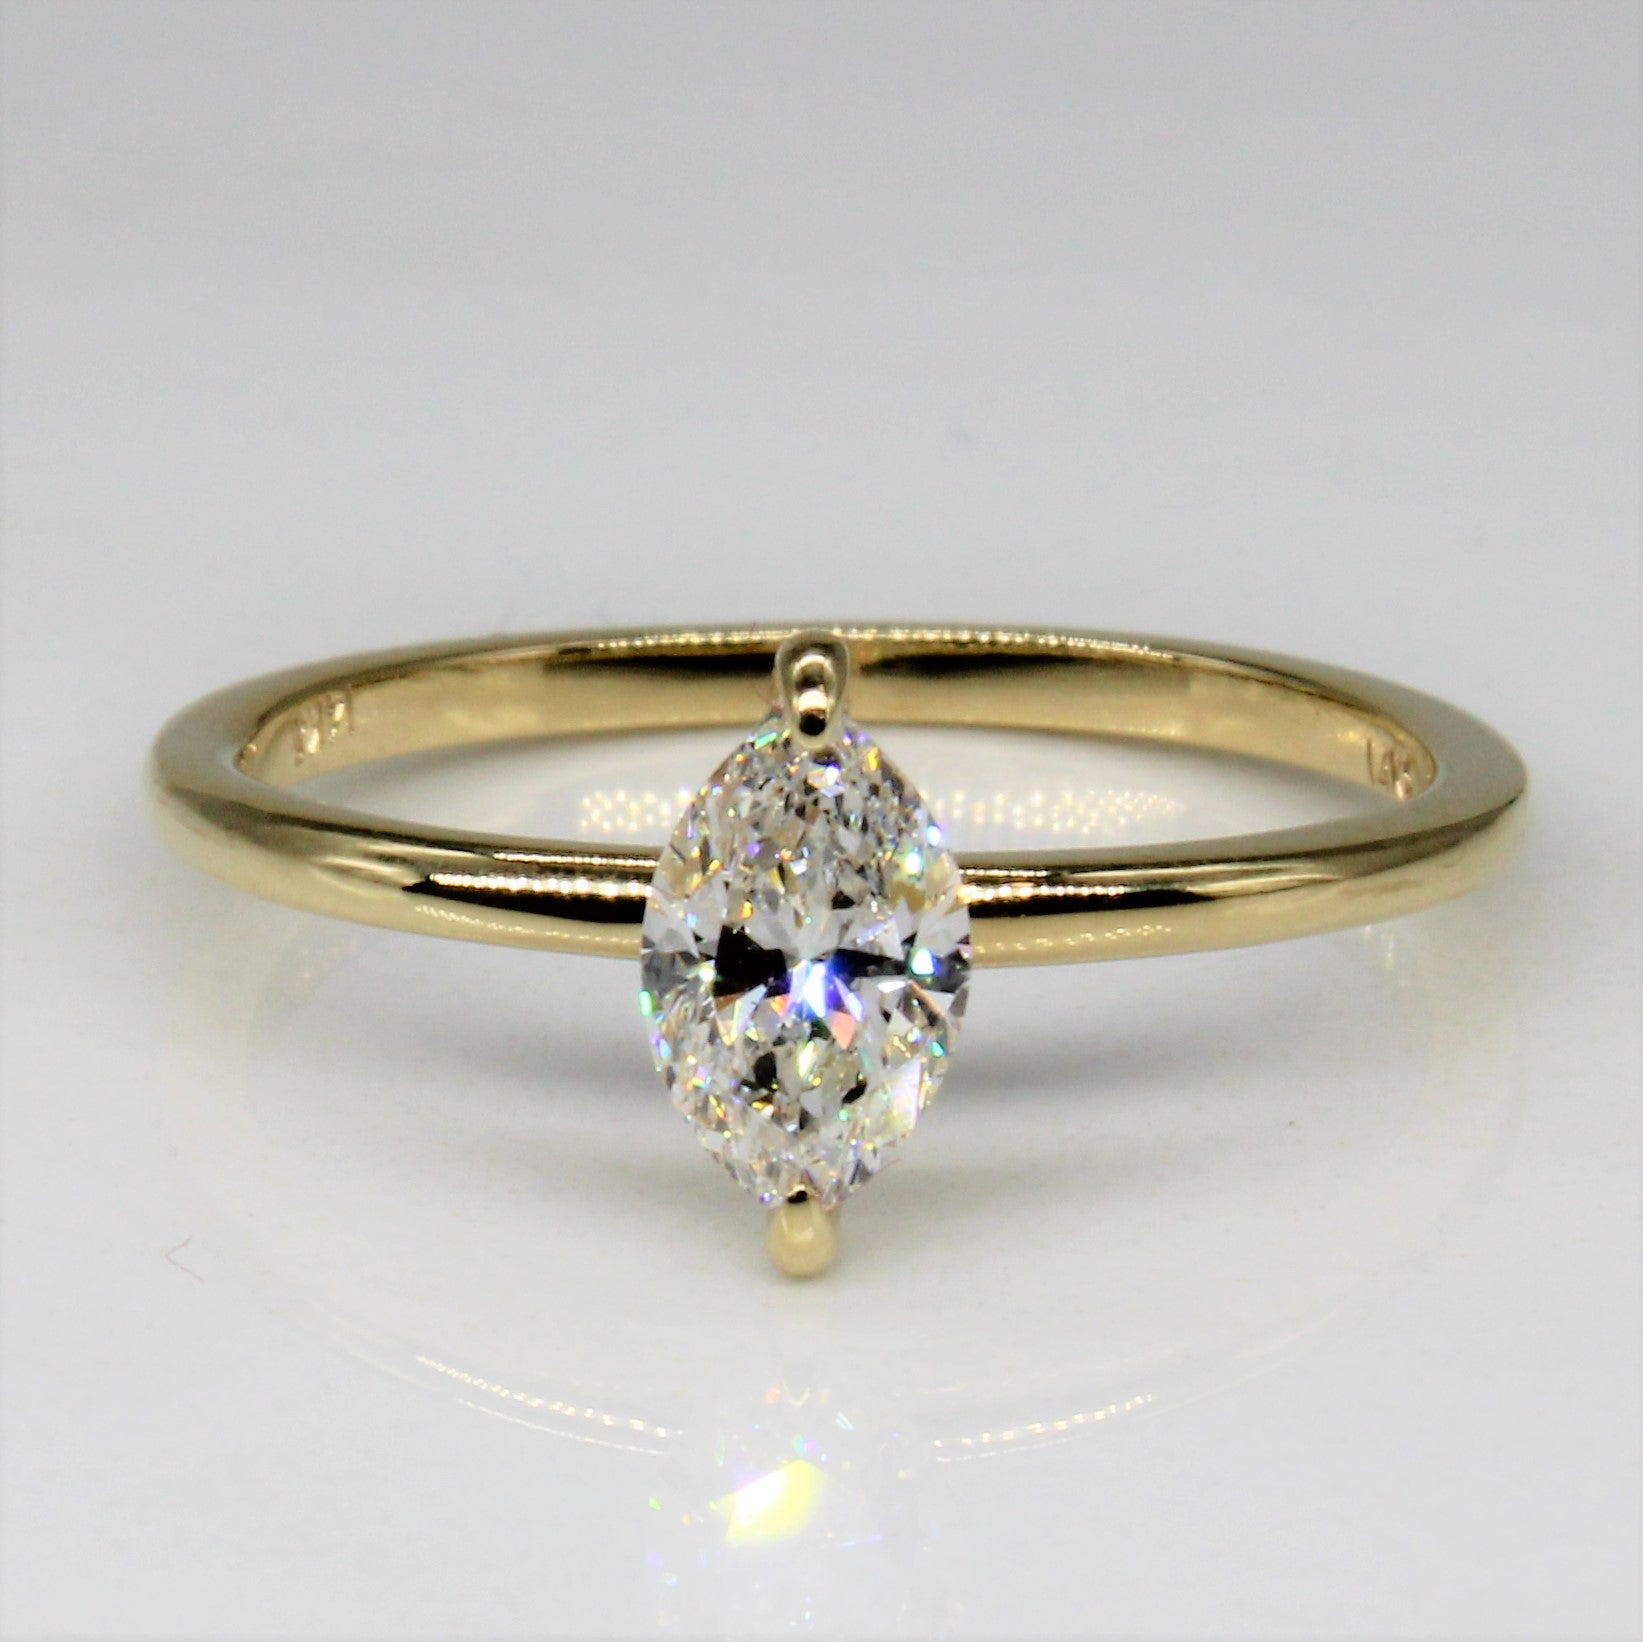 'Bespoke' Marquise Diamond Solitaire Engagement Ring | 0.55ct | SZ 6.75 |